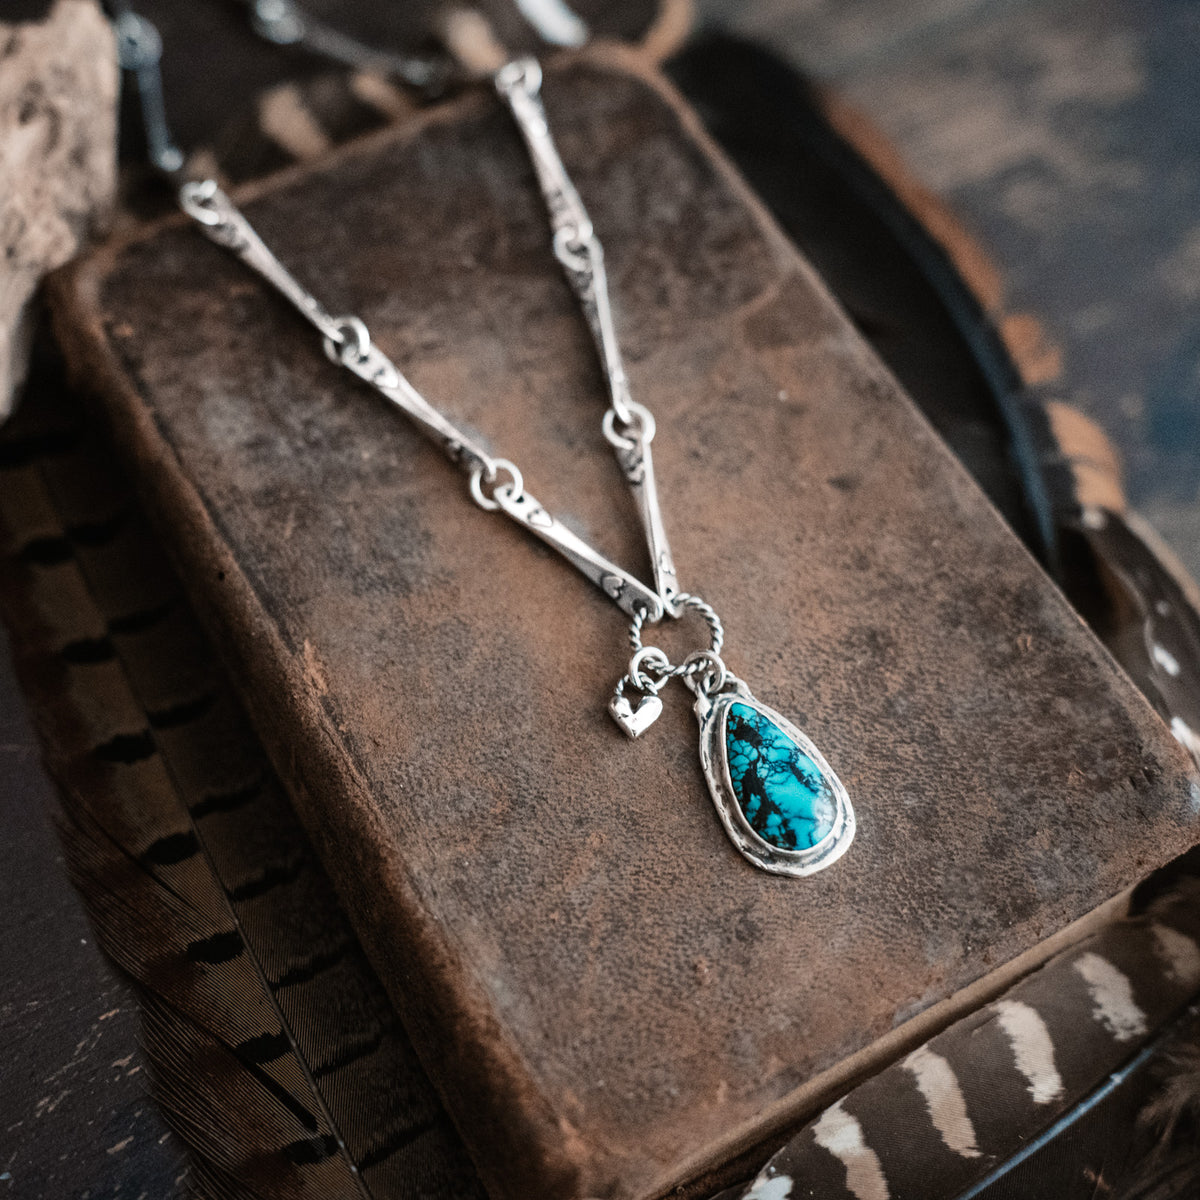 Links of Love Turquoise Necklace